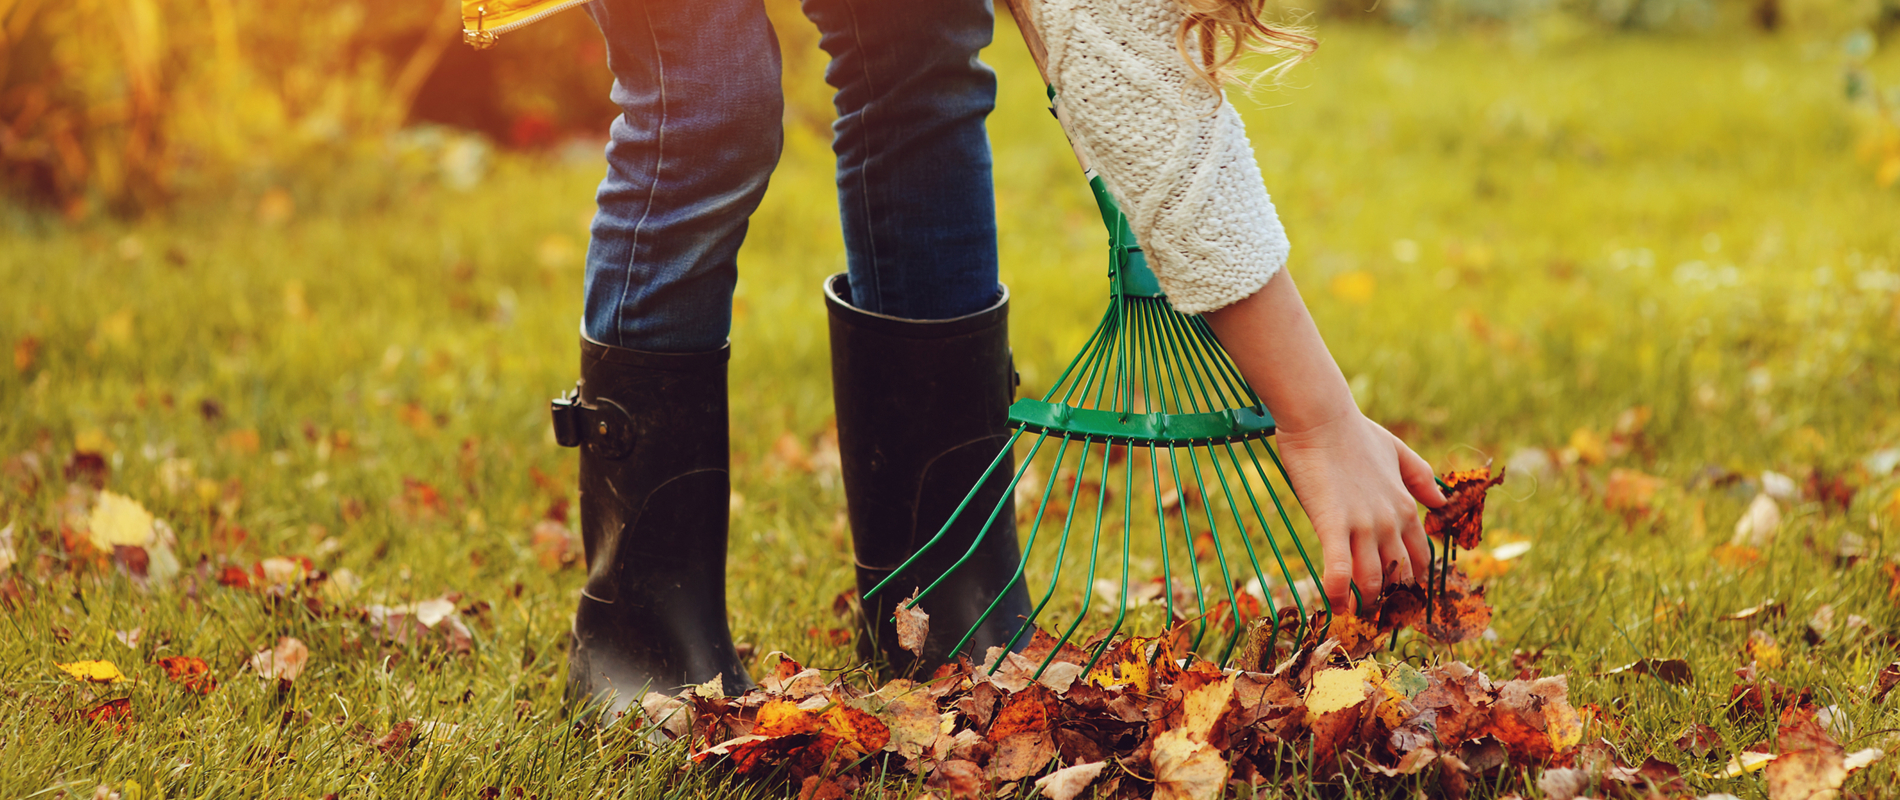 Town and Country, MO fall lawn care - fall lawn maintenance